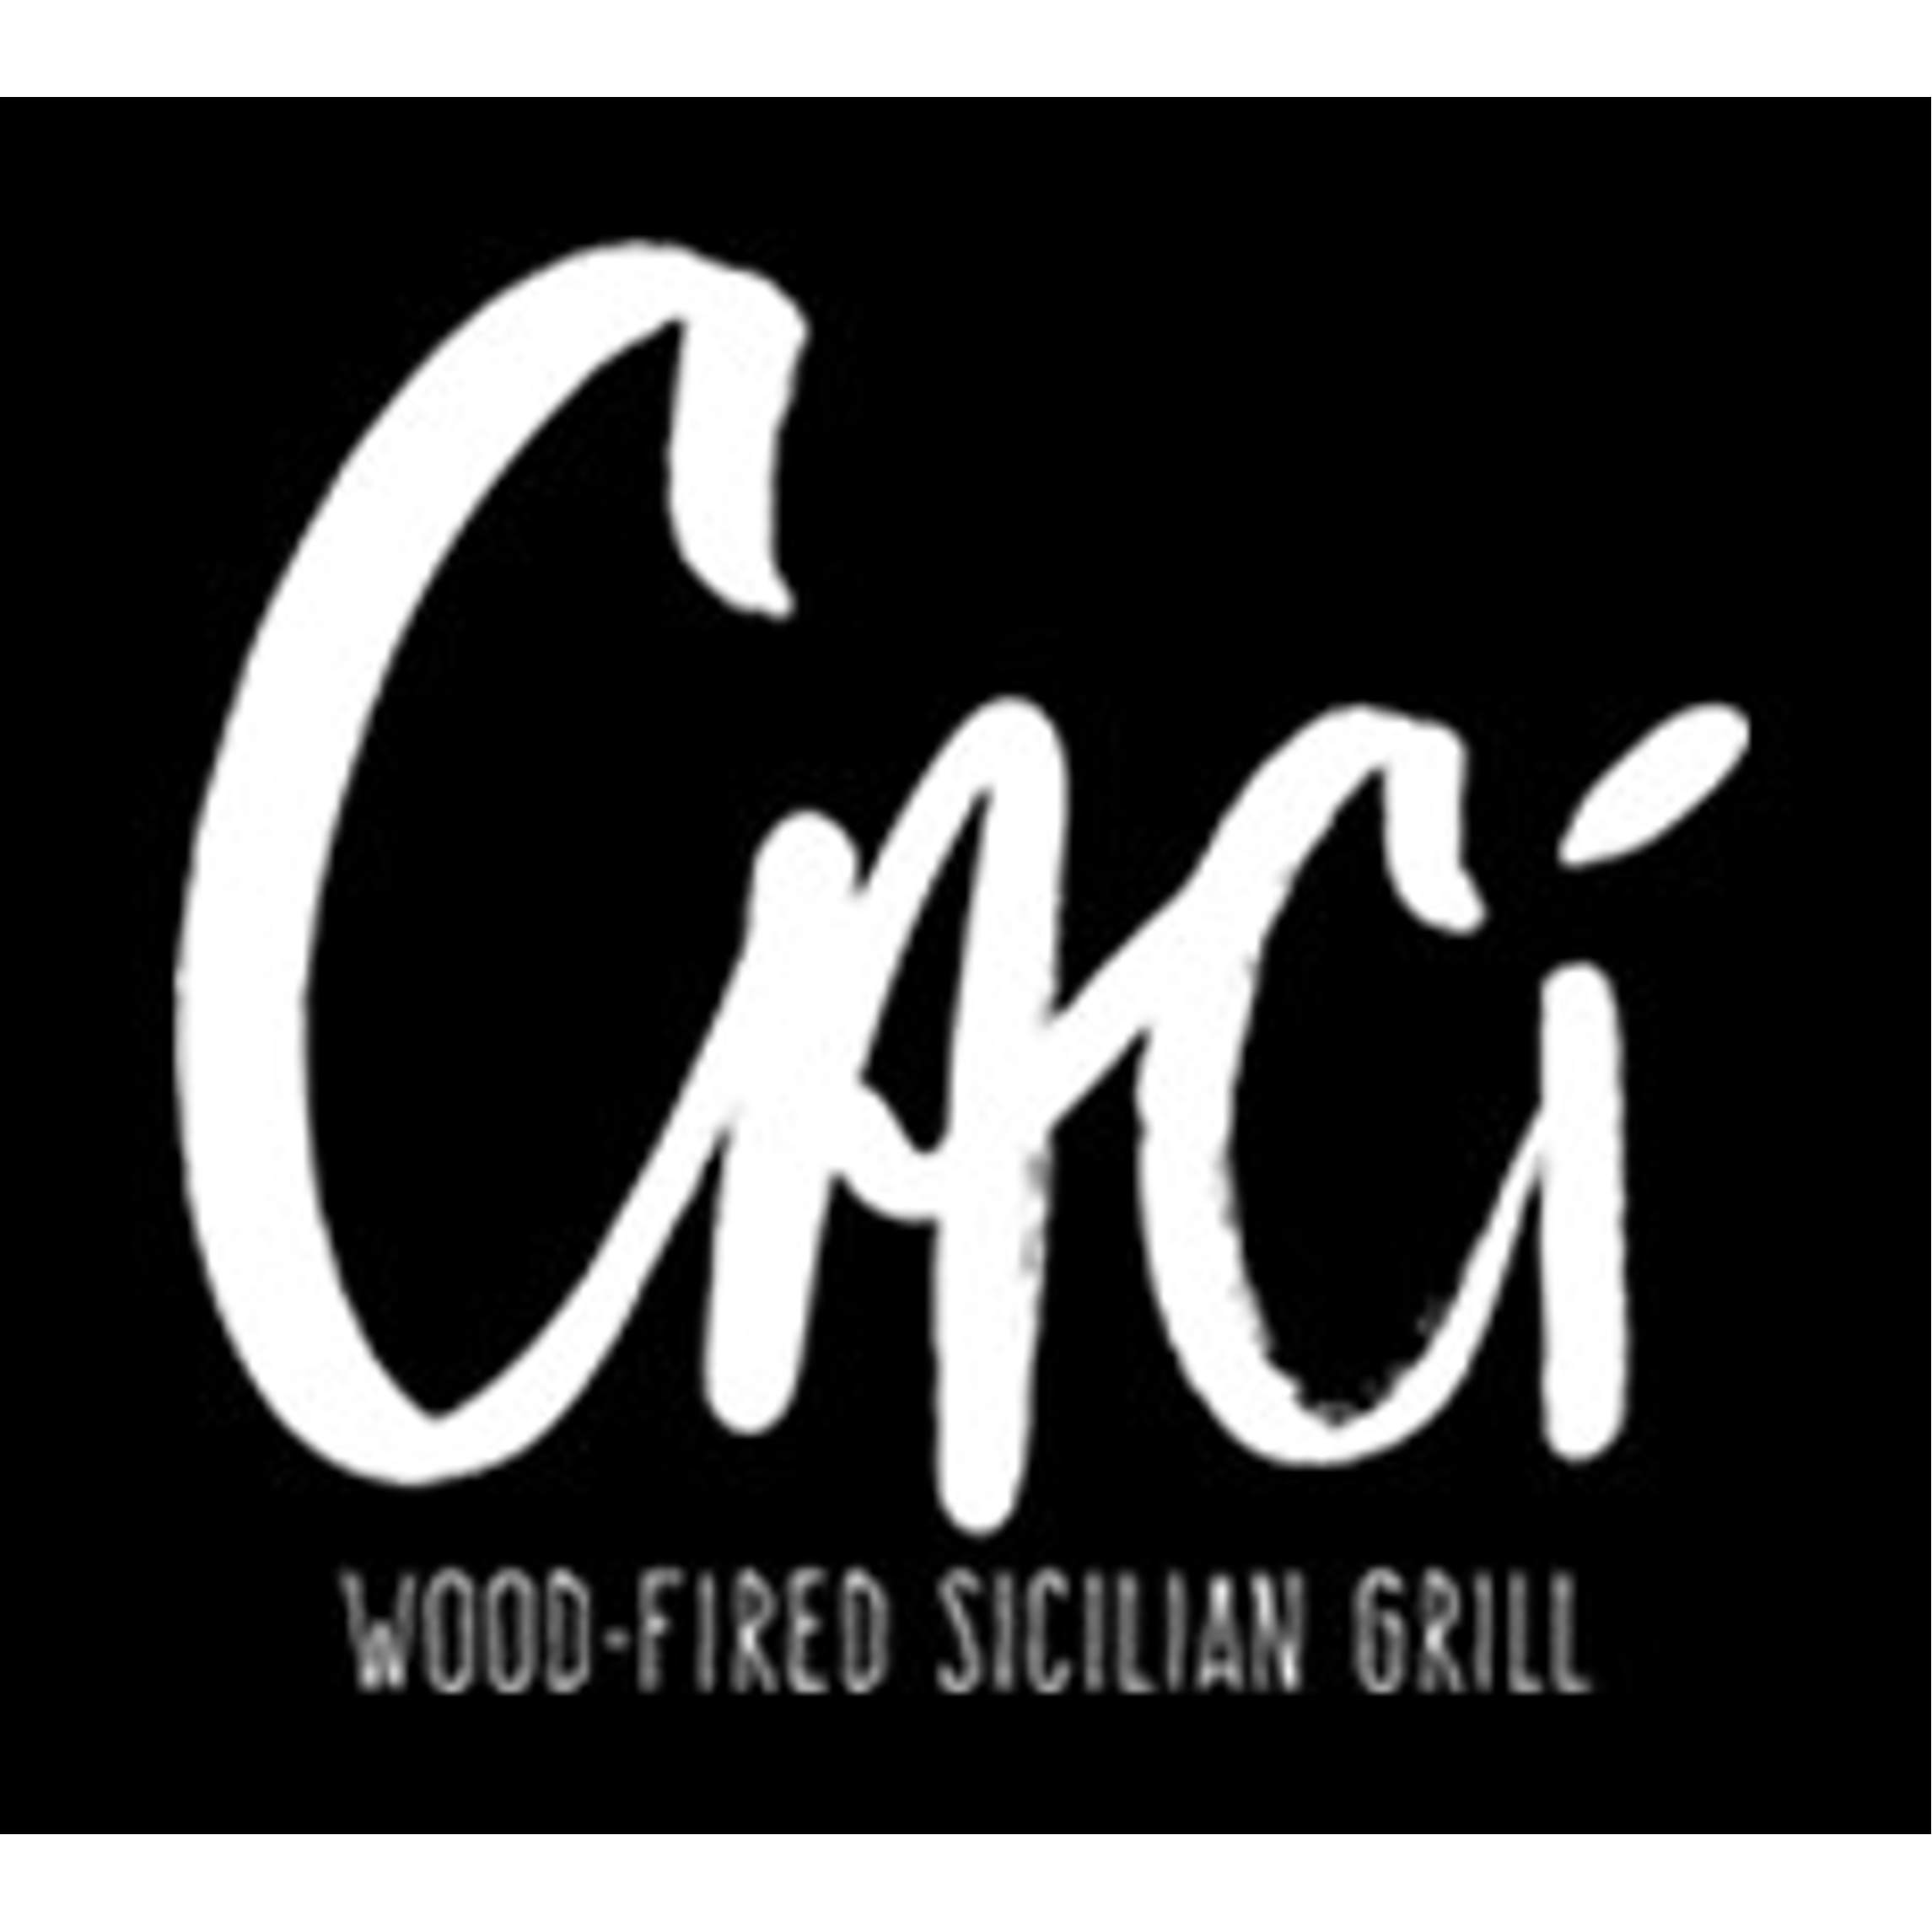 CACi Wood Fired Grill